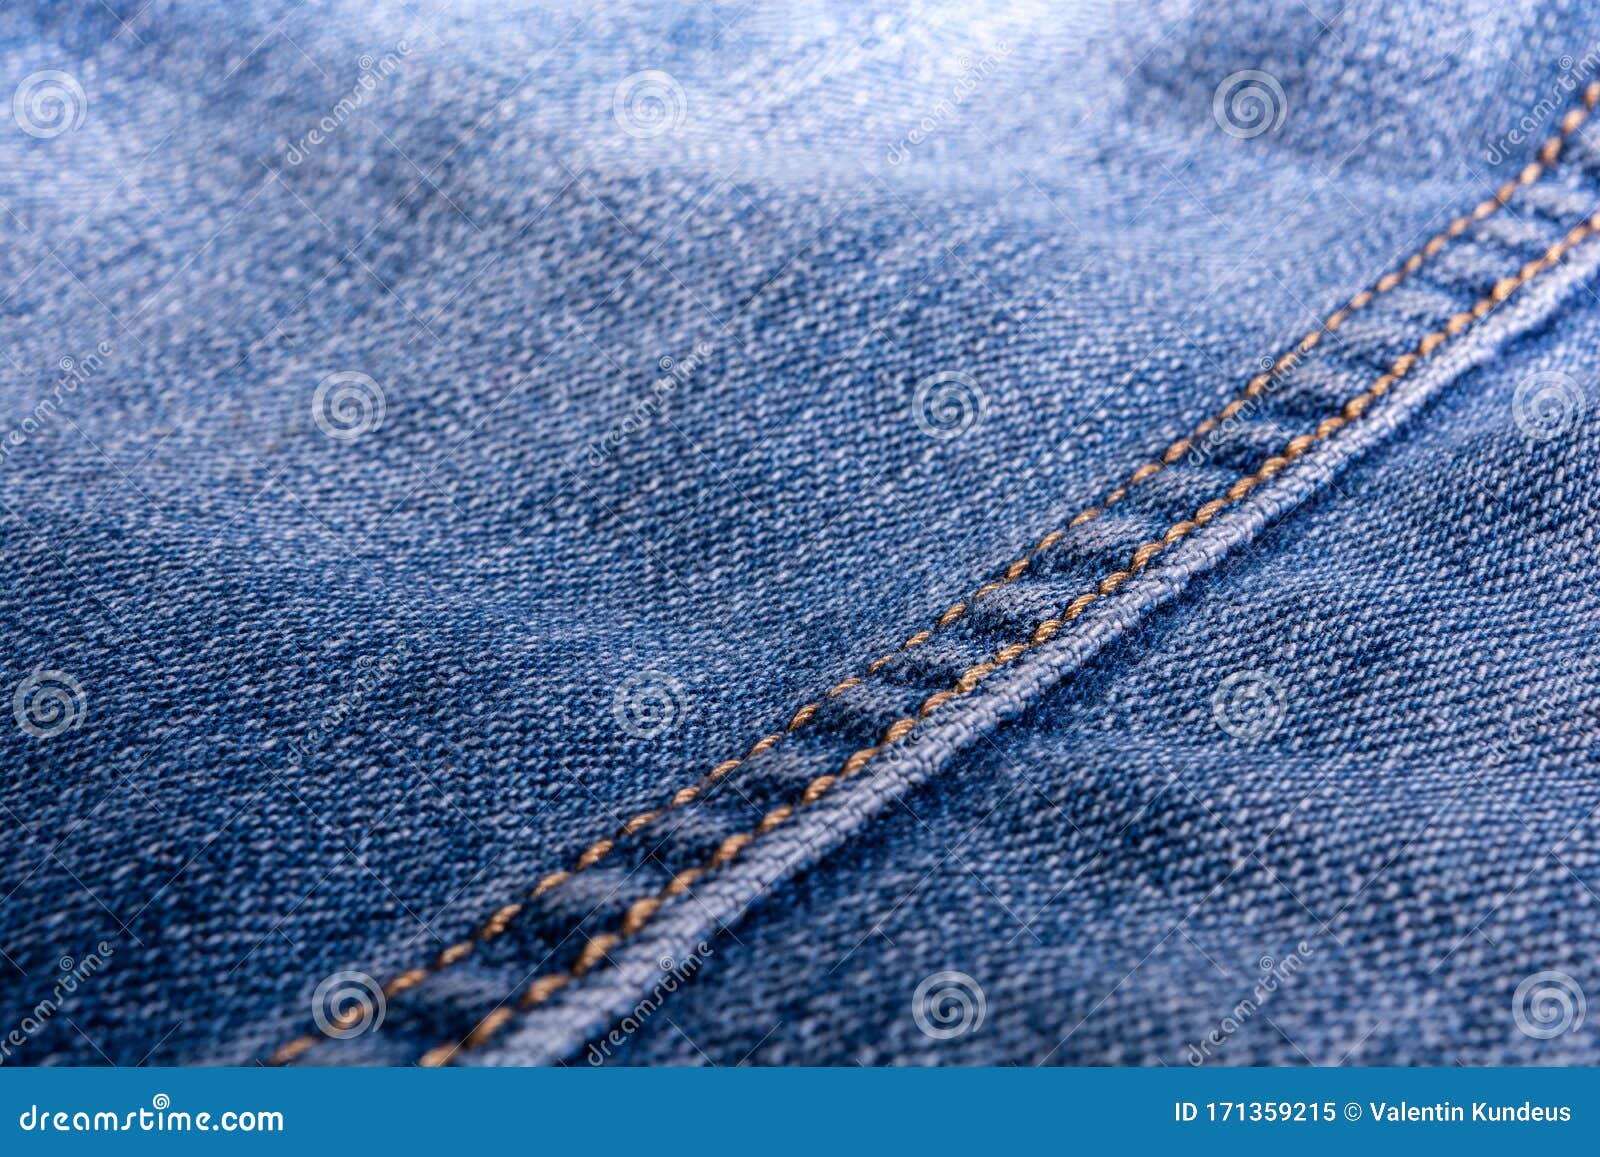 Jeans Texture. Denim. the Seam on the Fabric. Light Industry Stock ...